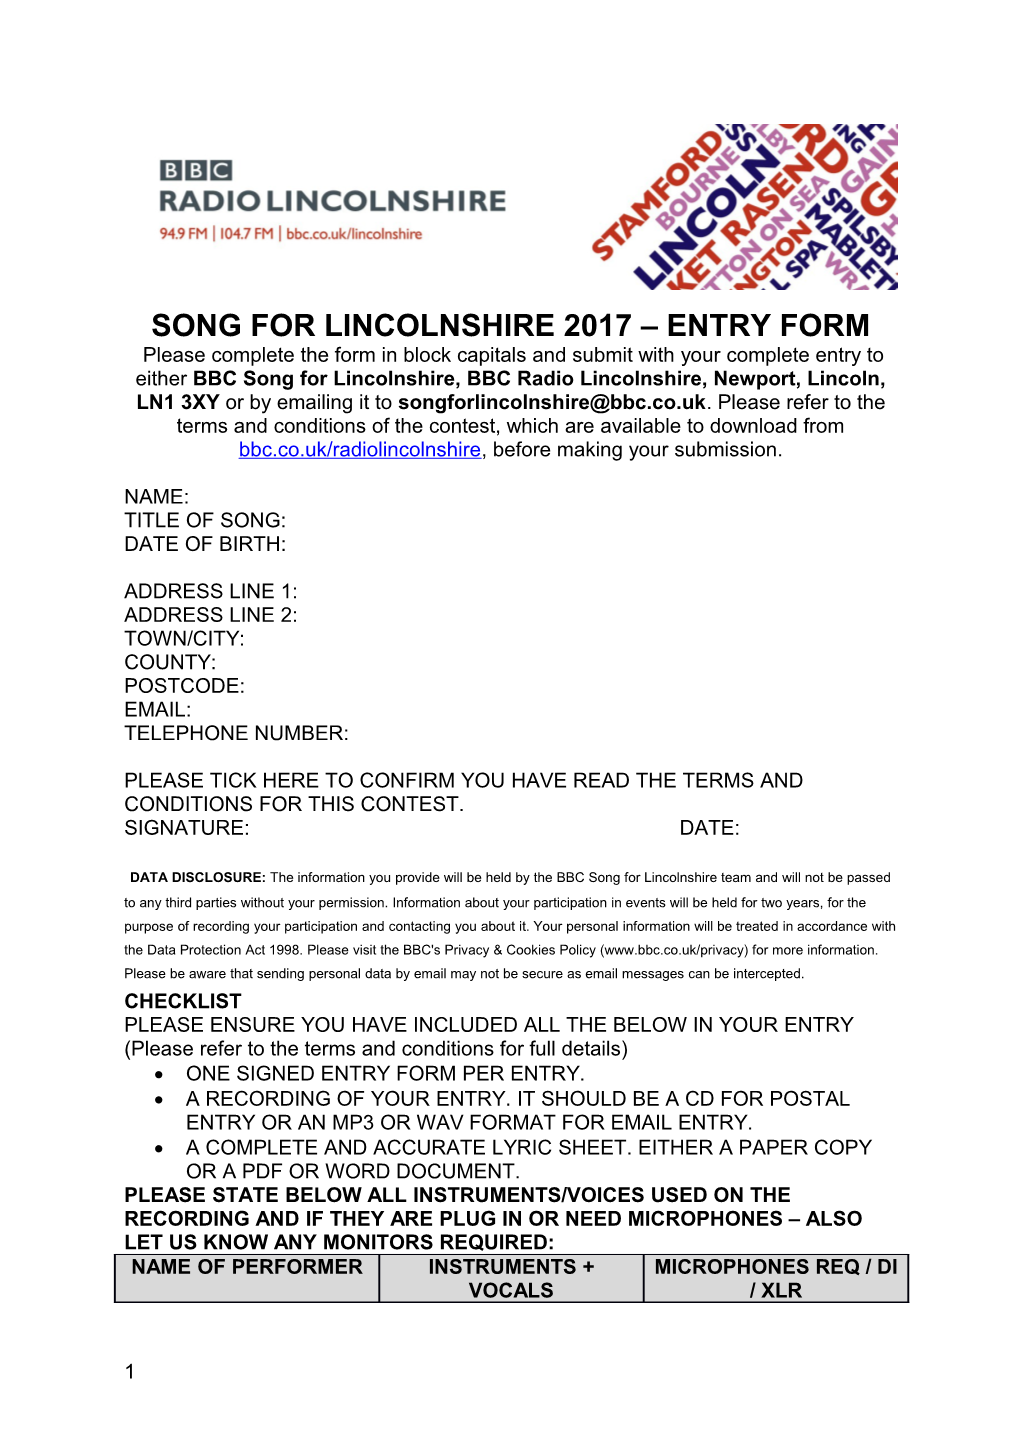 Song for Lincolnshire 2017 Entry Form